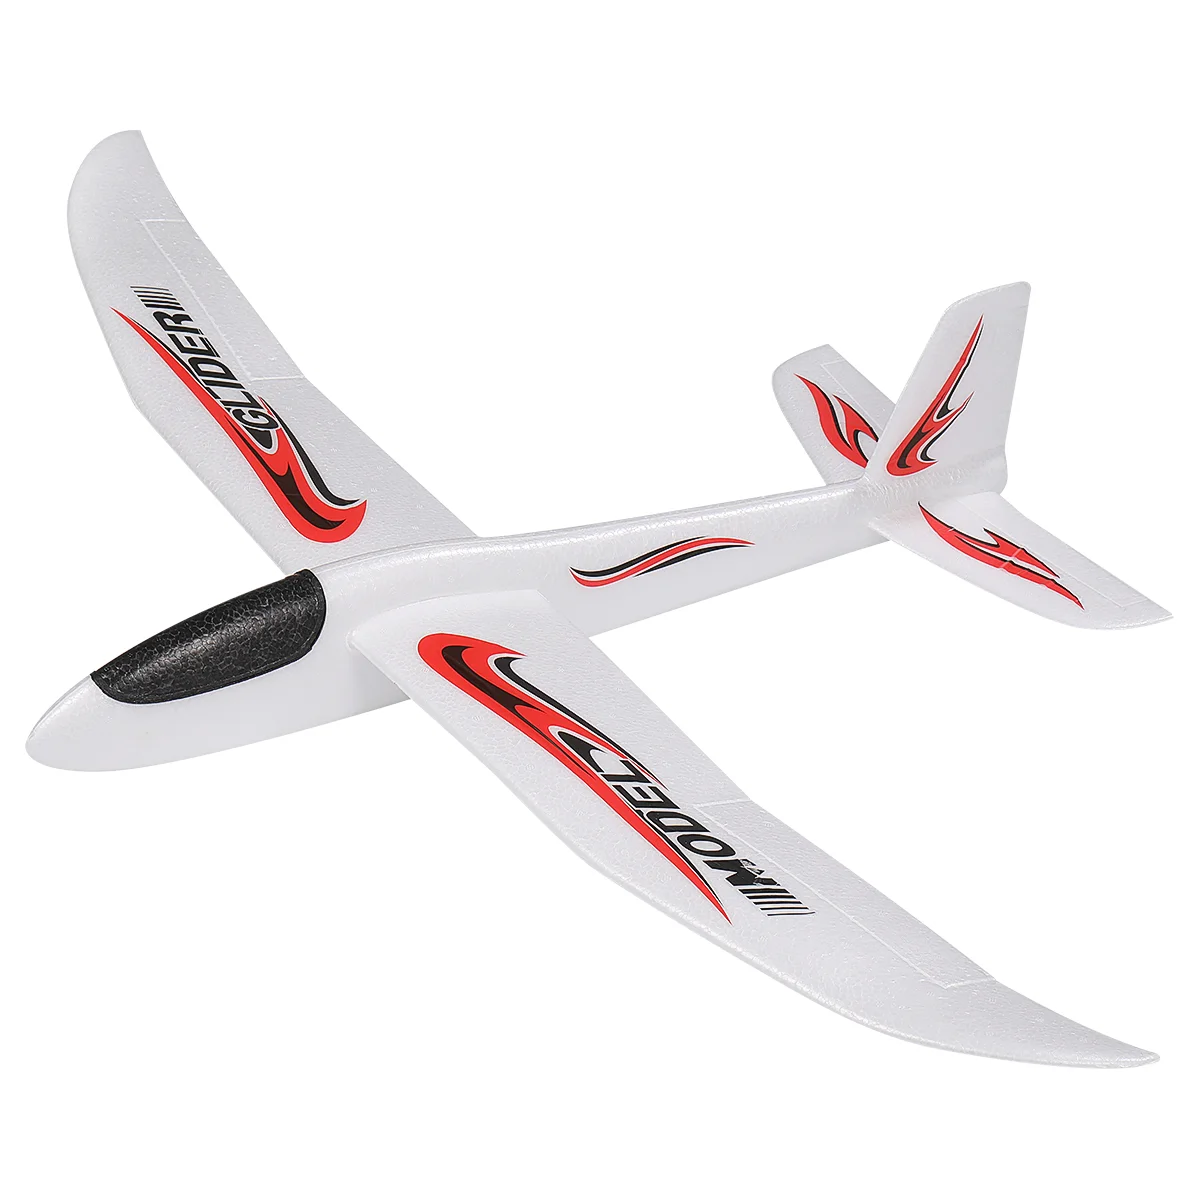 

Tomaibaby 99cm Throwing Aircraft Children's Aerobatic Plane Glider Airplane Outdoor Sports Flying Toy